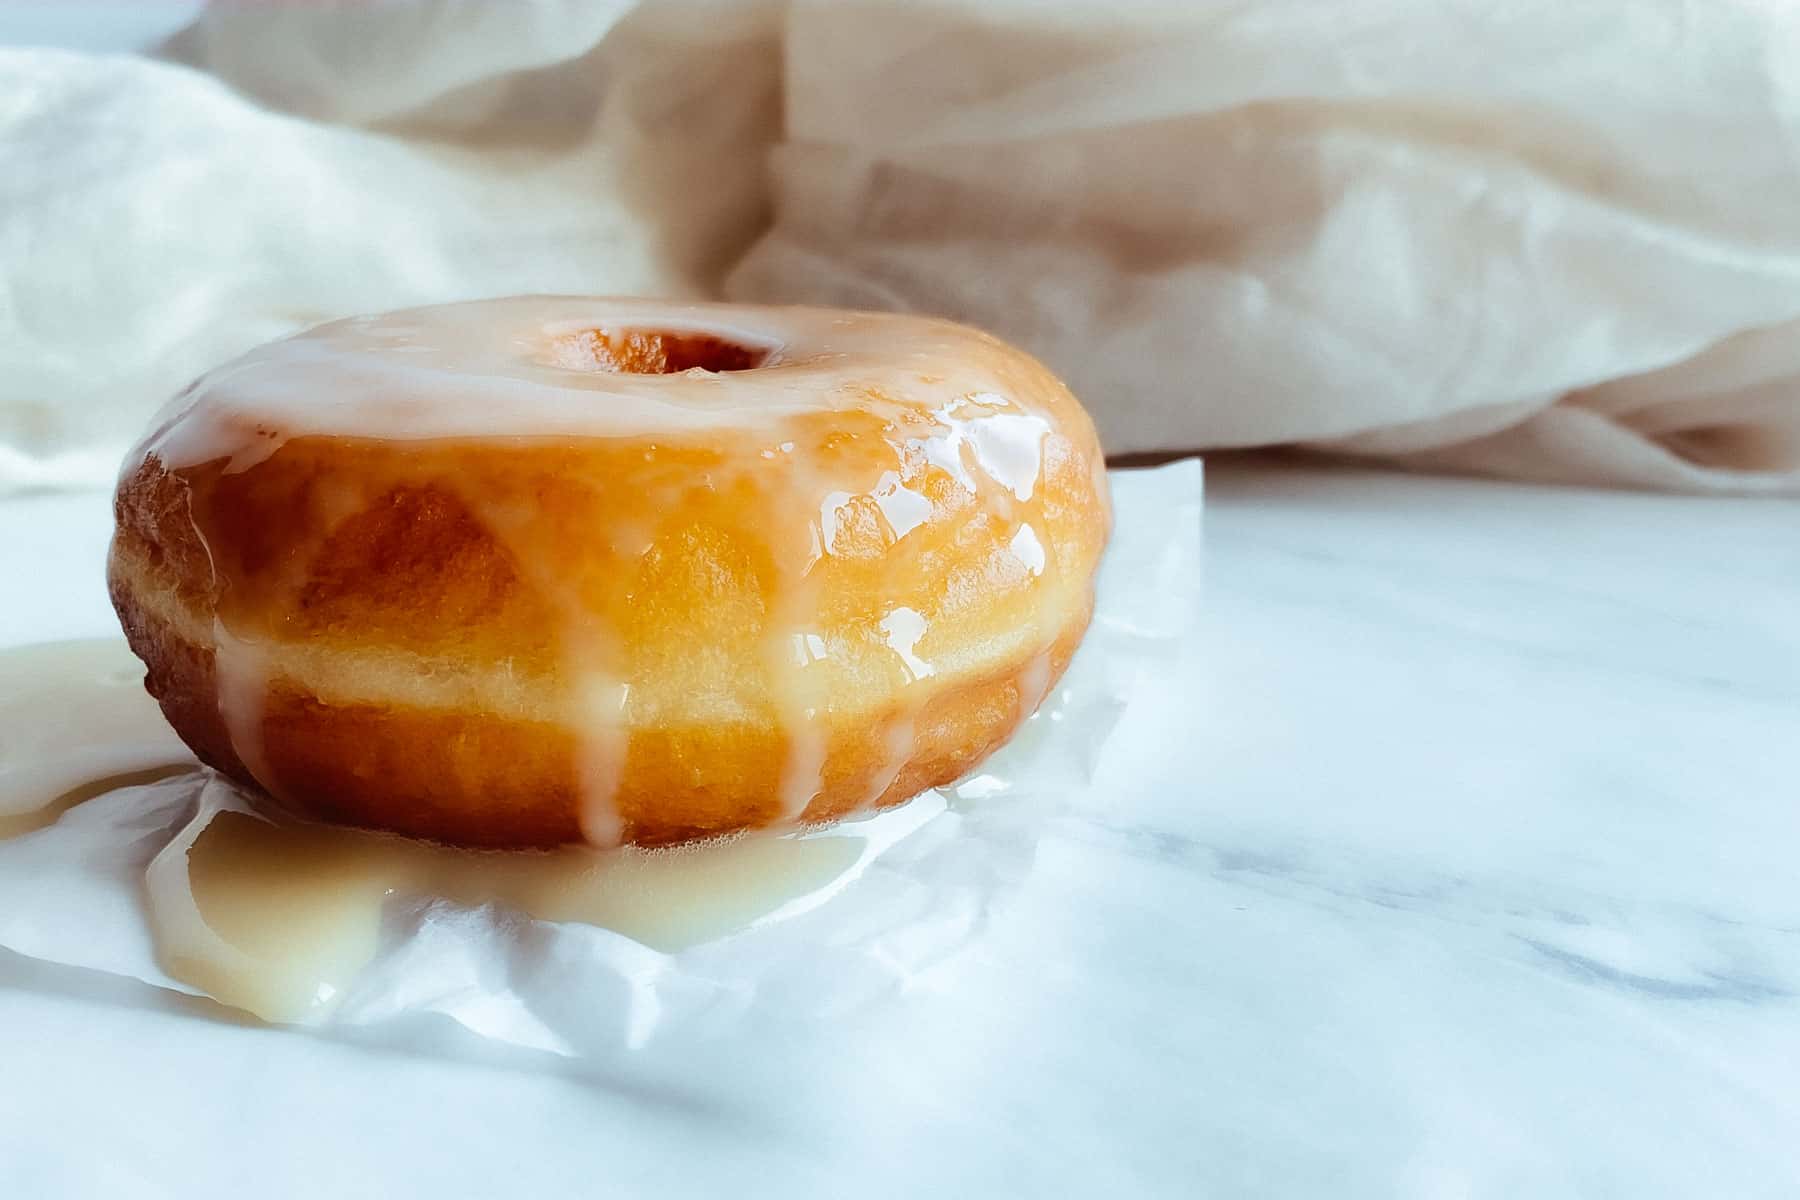 vegan yeast donut from the side